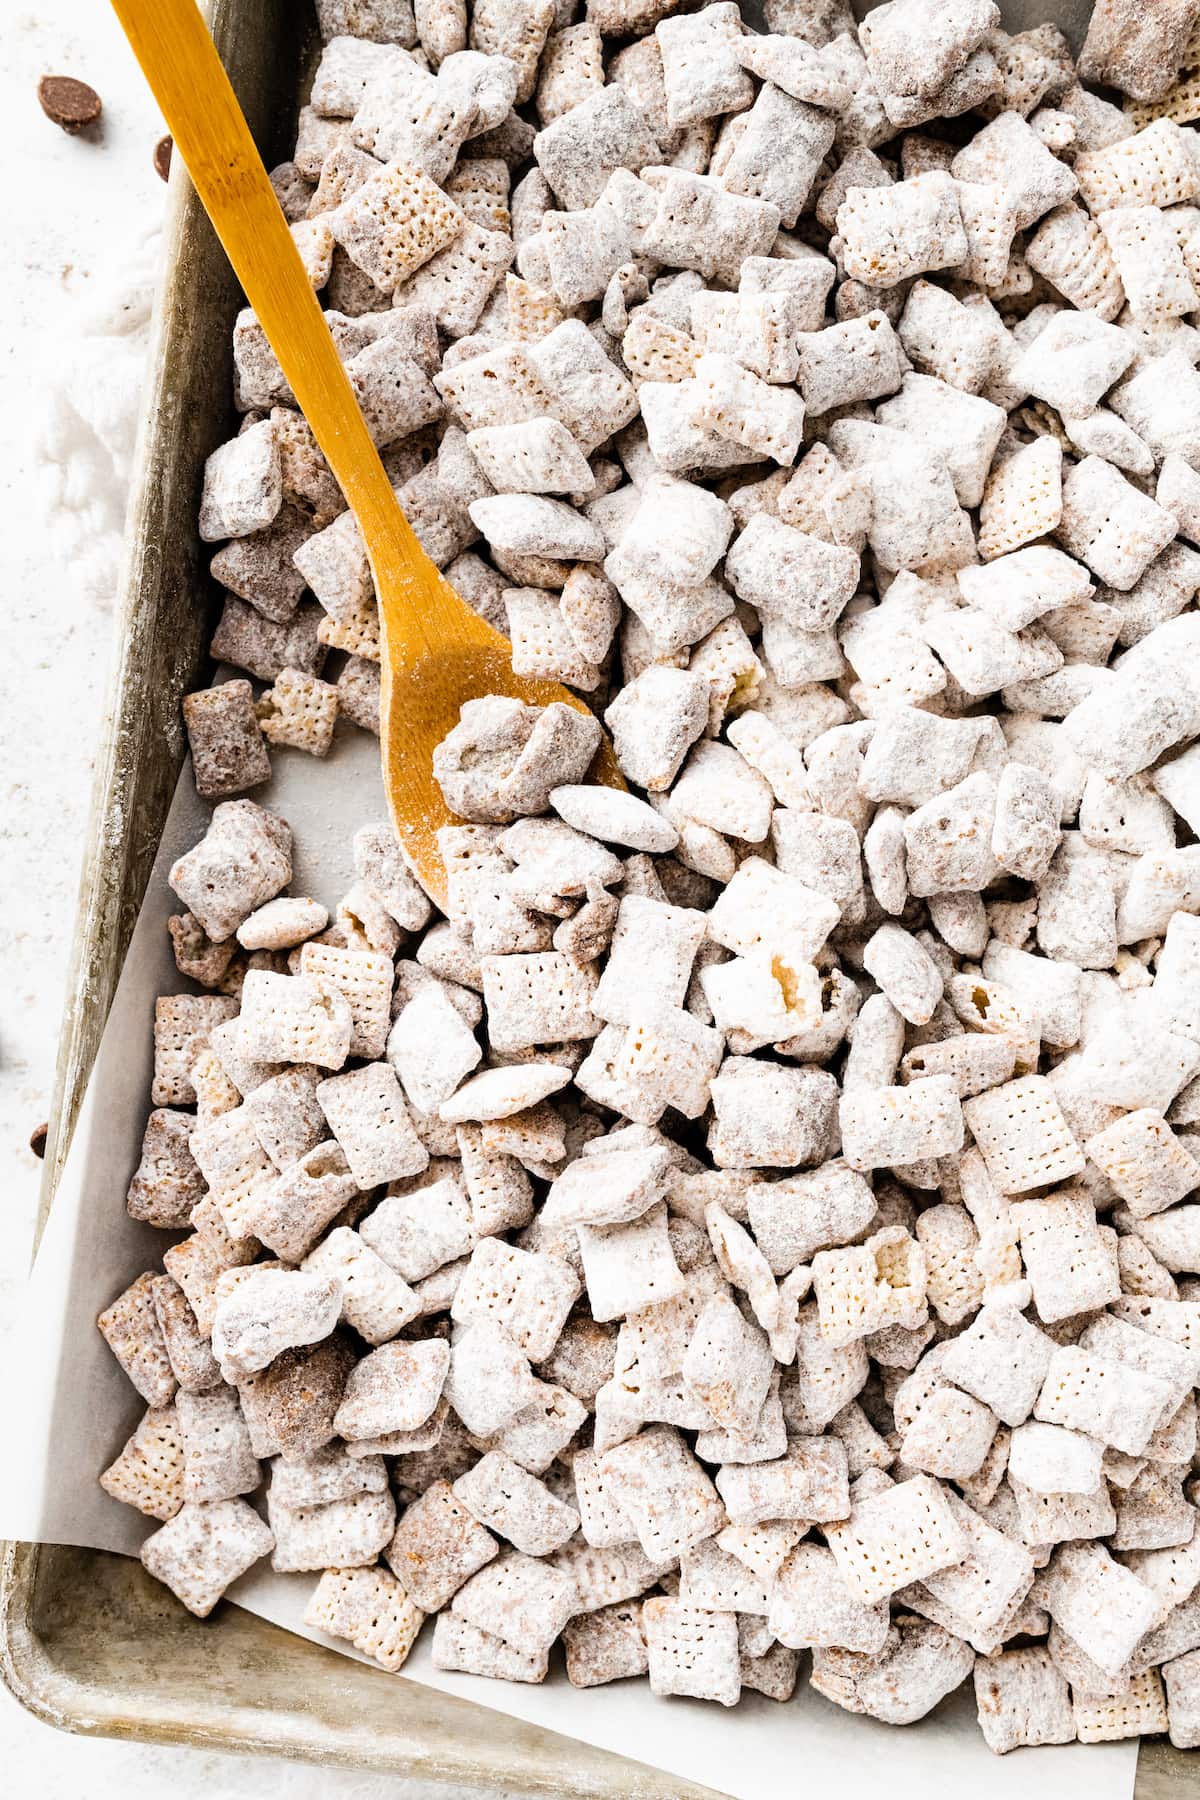 Puppy chow on a baking tray with a small wooden spoon.